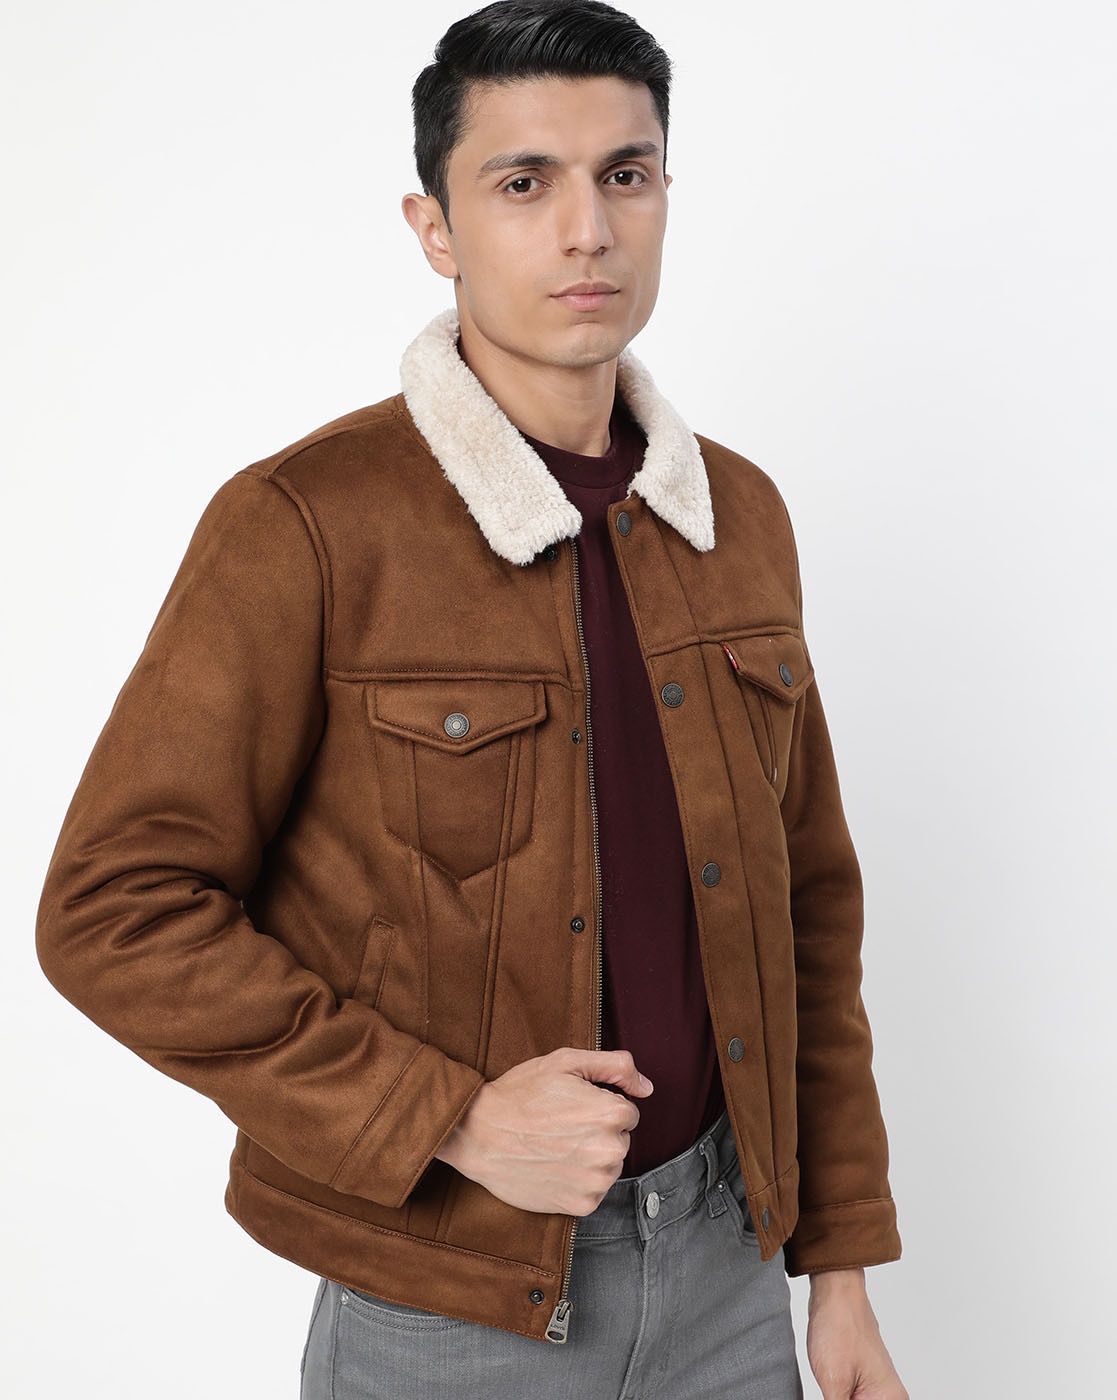 Leather Jackets Online | Custom Leather Jackets Canada |Lusso Leather